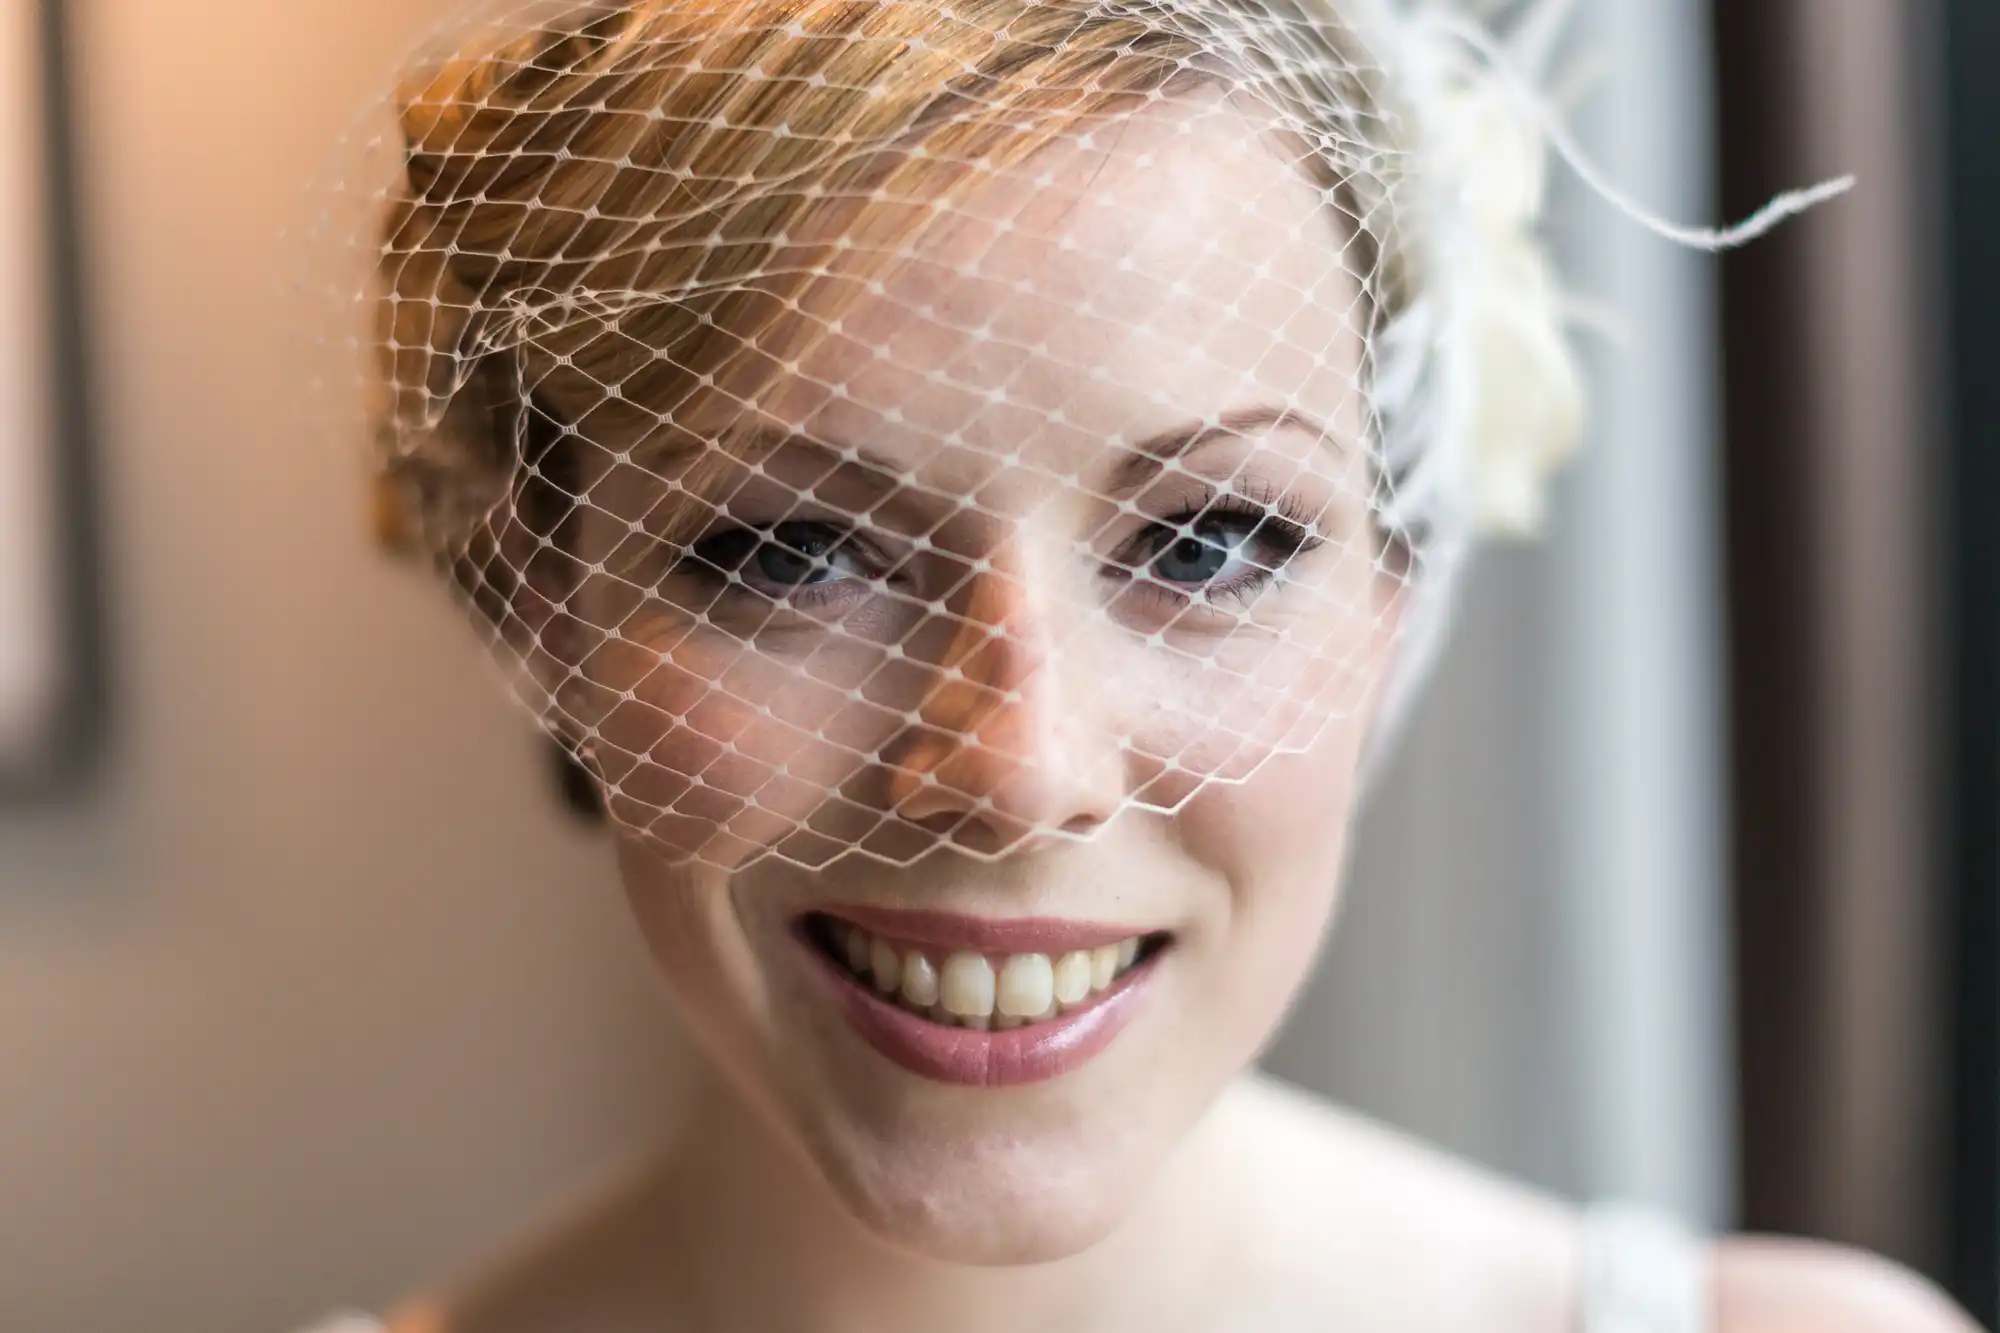 Close-up of a smiling woman with short hair wearing a white bridal veil with a mesh design, looking gently towards the camera.